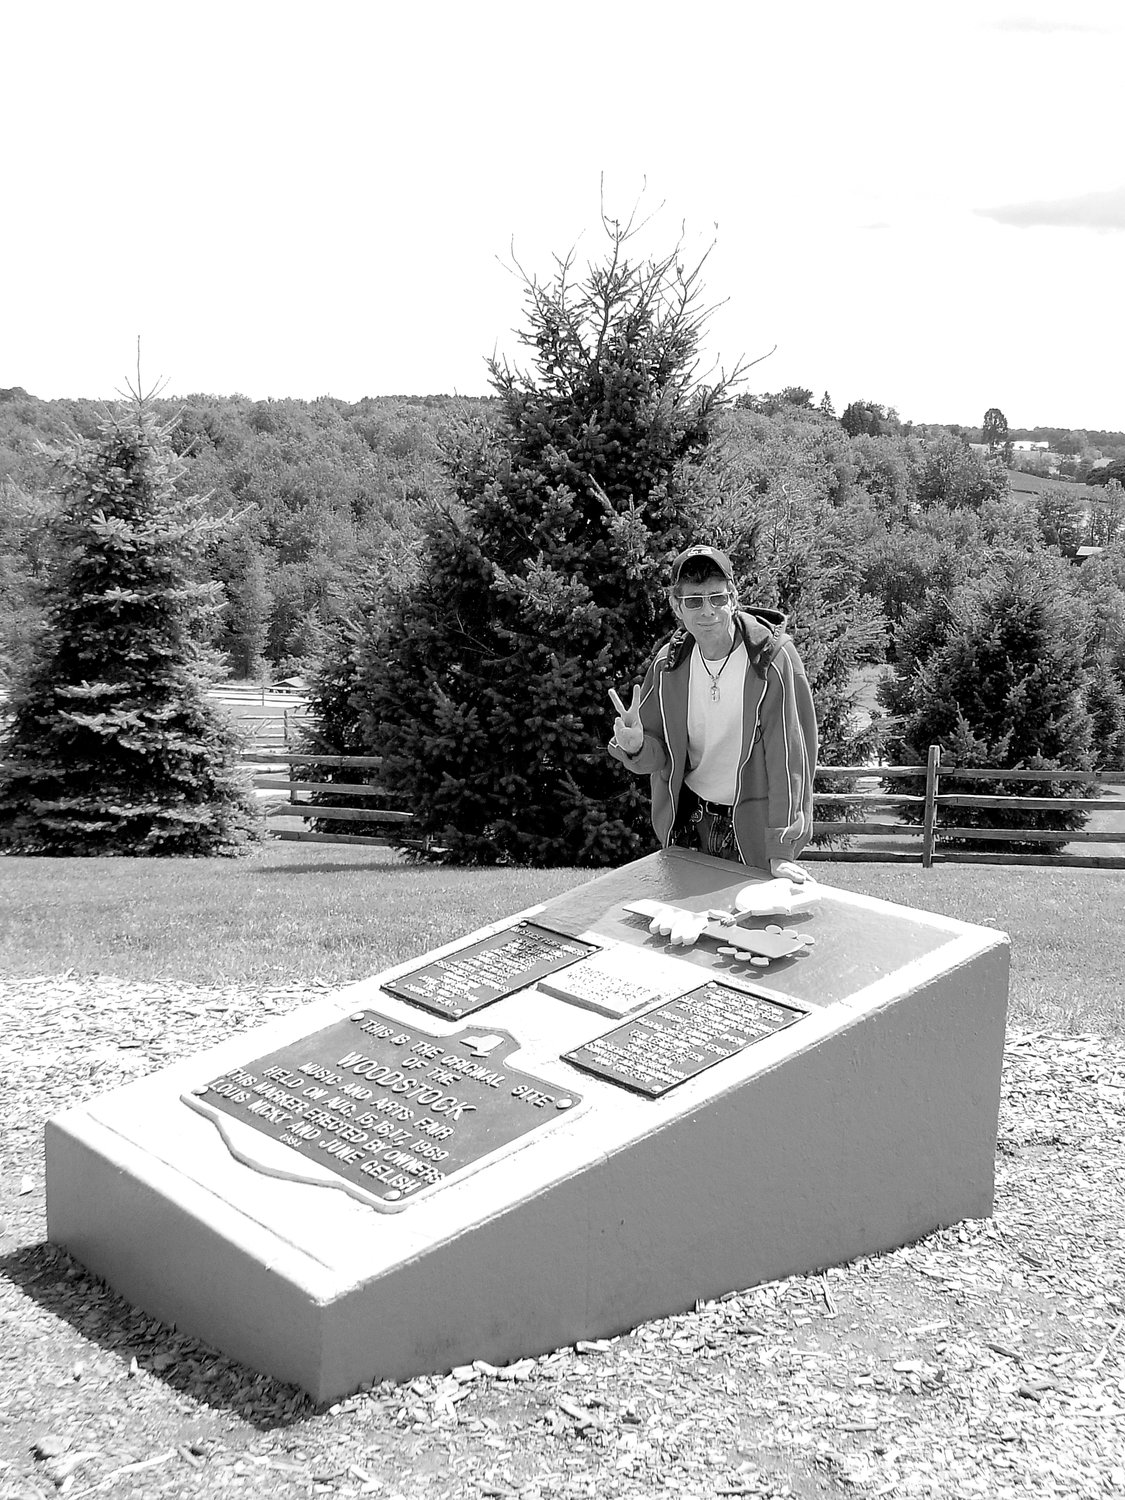 Jonathan Fox returns to the plaque commemorating the scene of the original Woodstock concert, 40 years after having hitched and hiked to the iconic event in his teens.